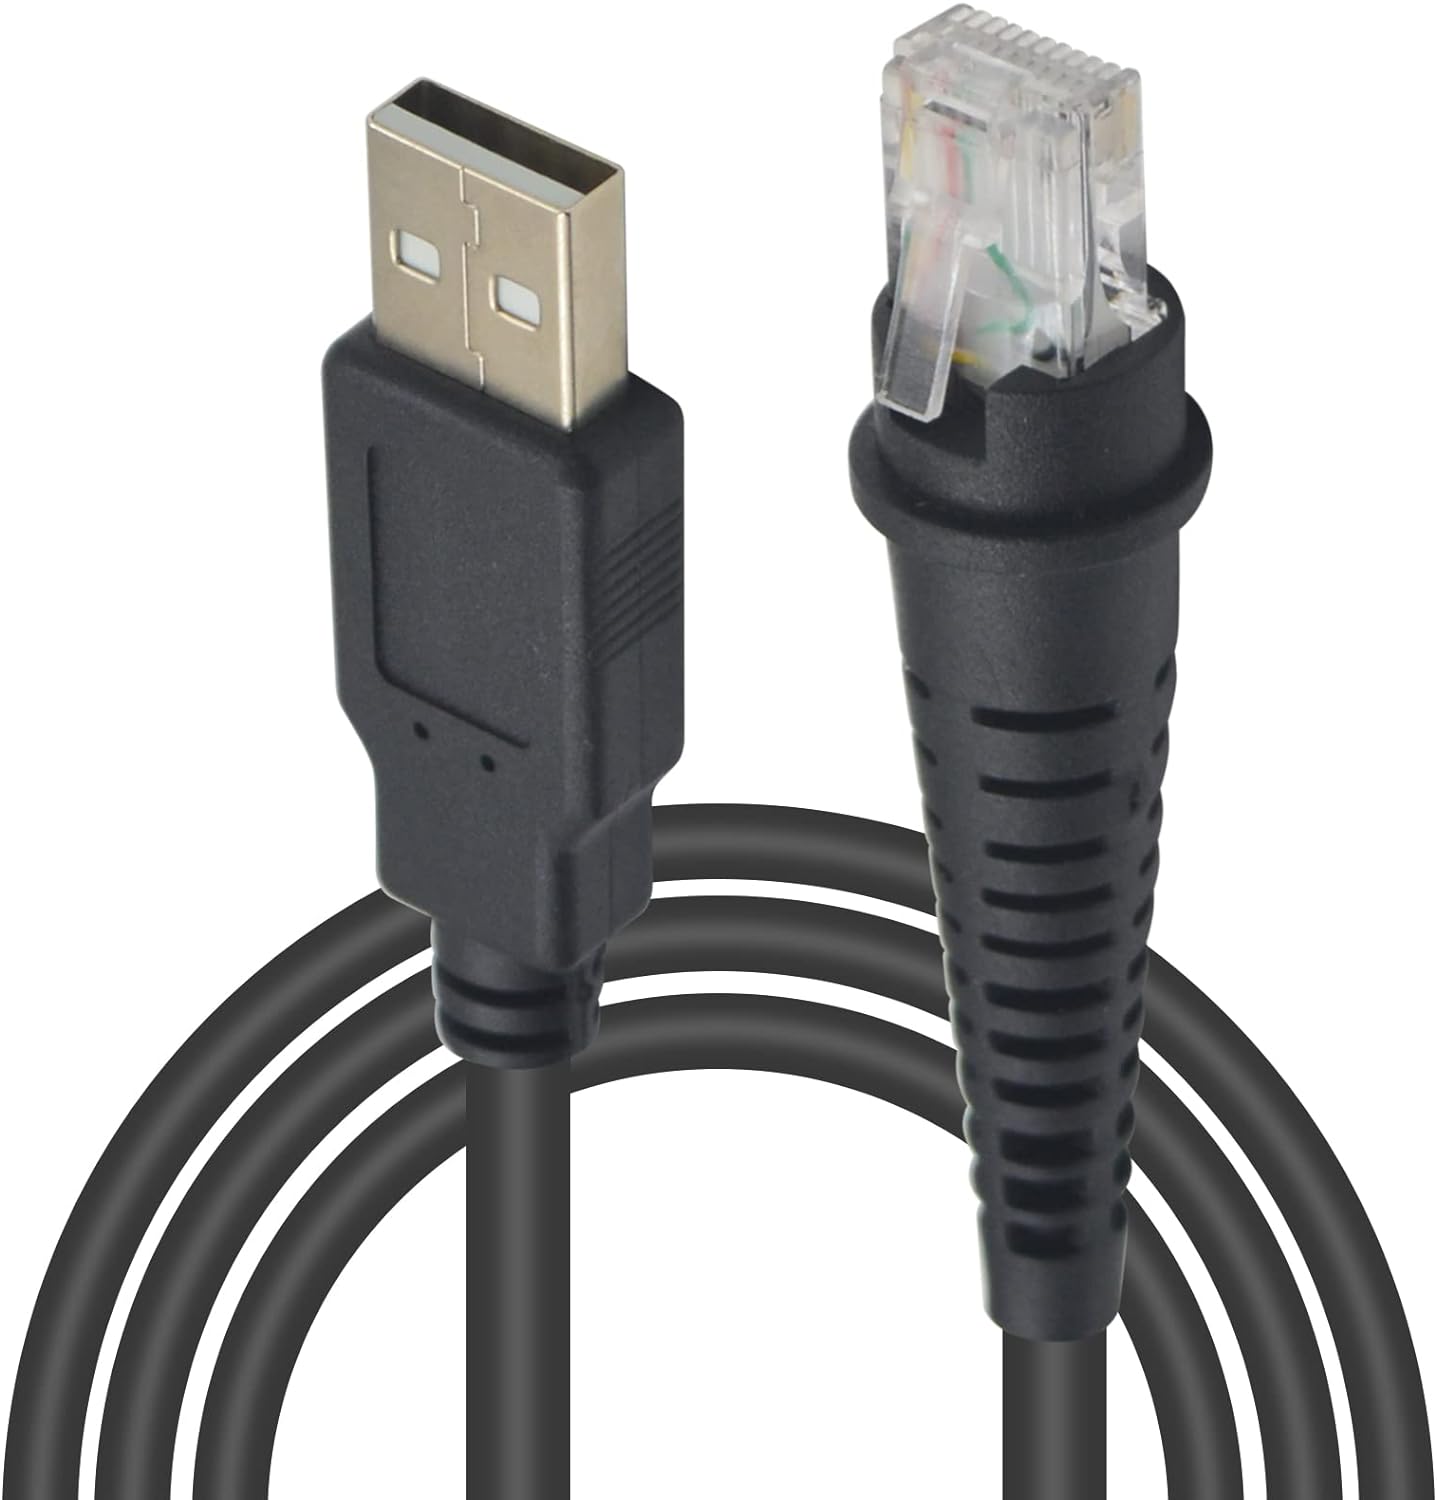 USB 2.0 to RJ45 Cable Compatible for Honey-Well Barcode Scanner 1900 Series